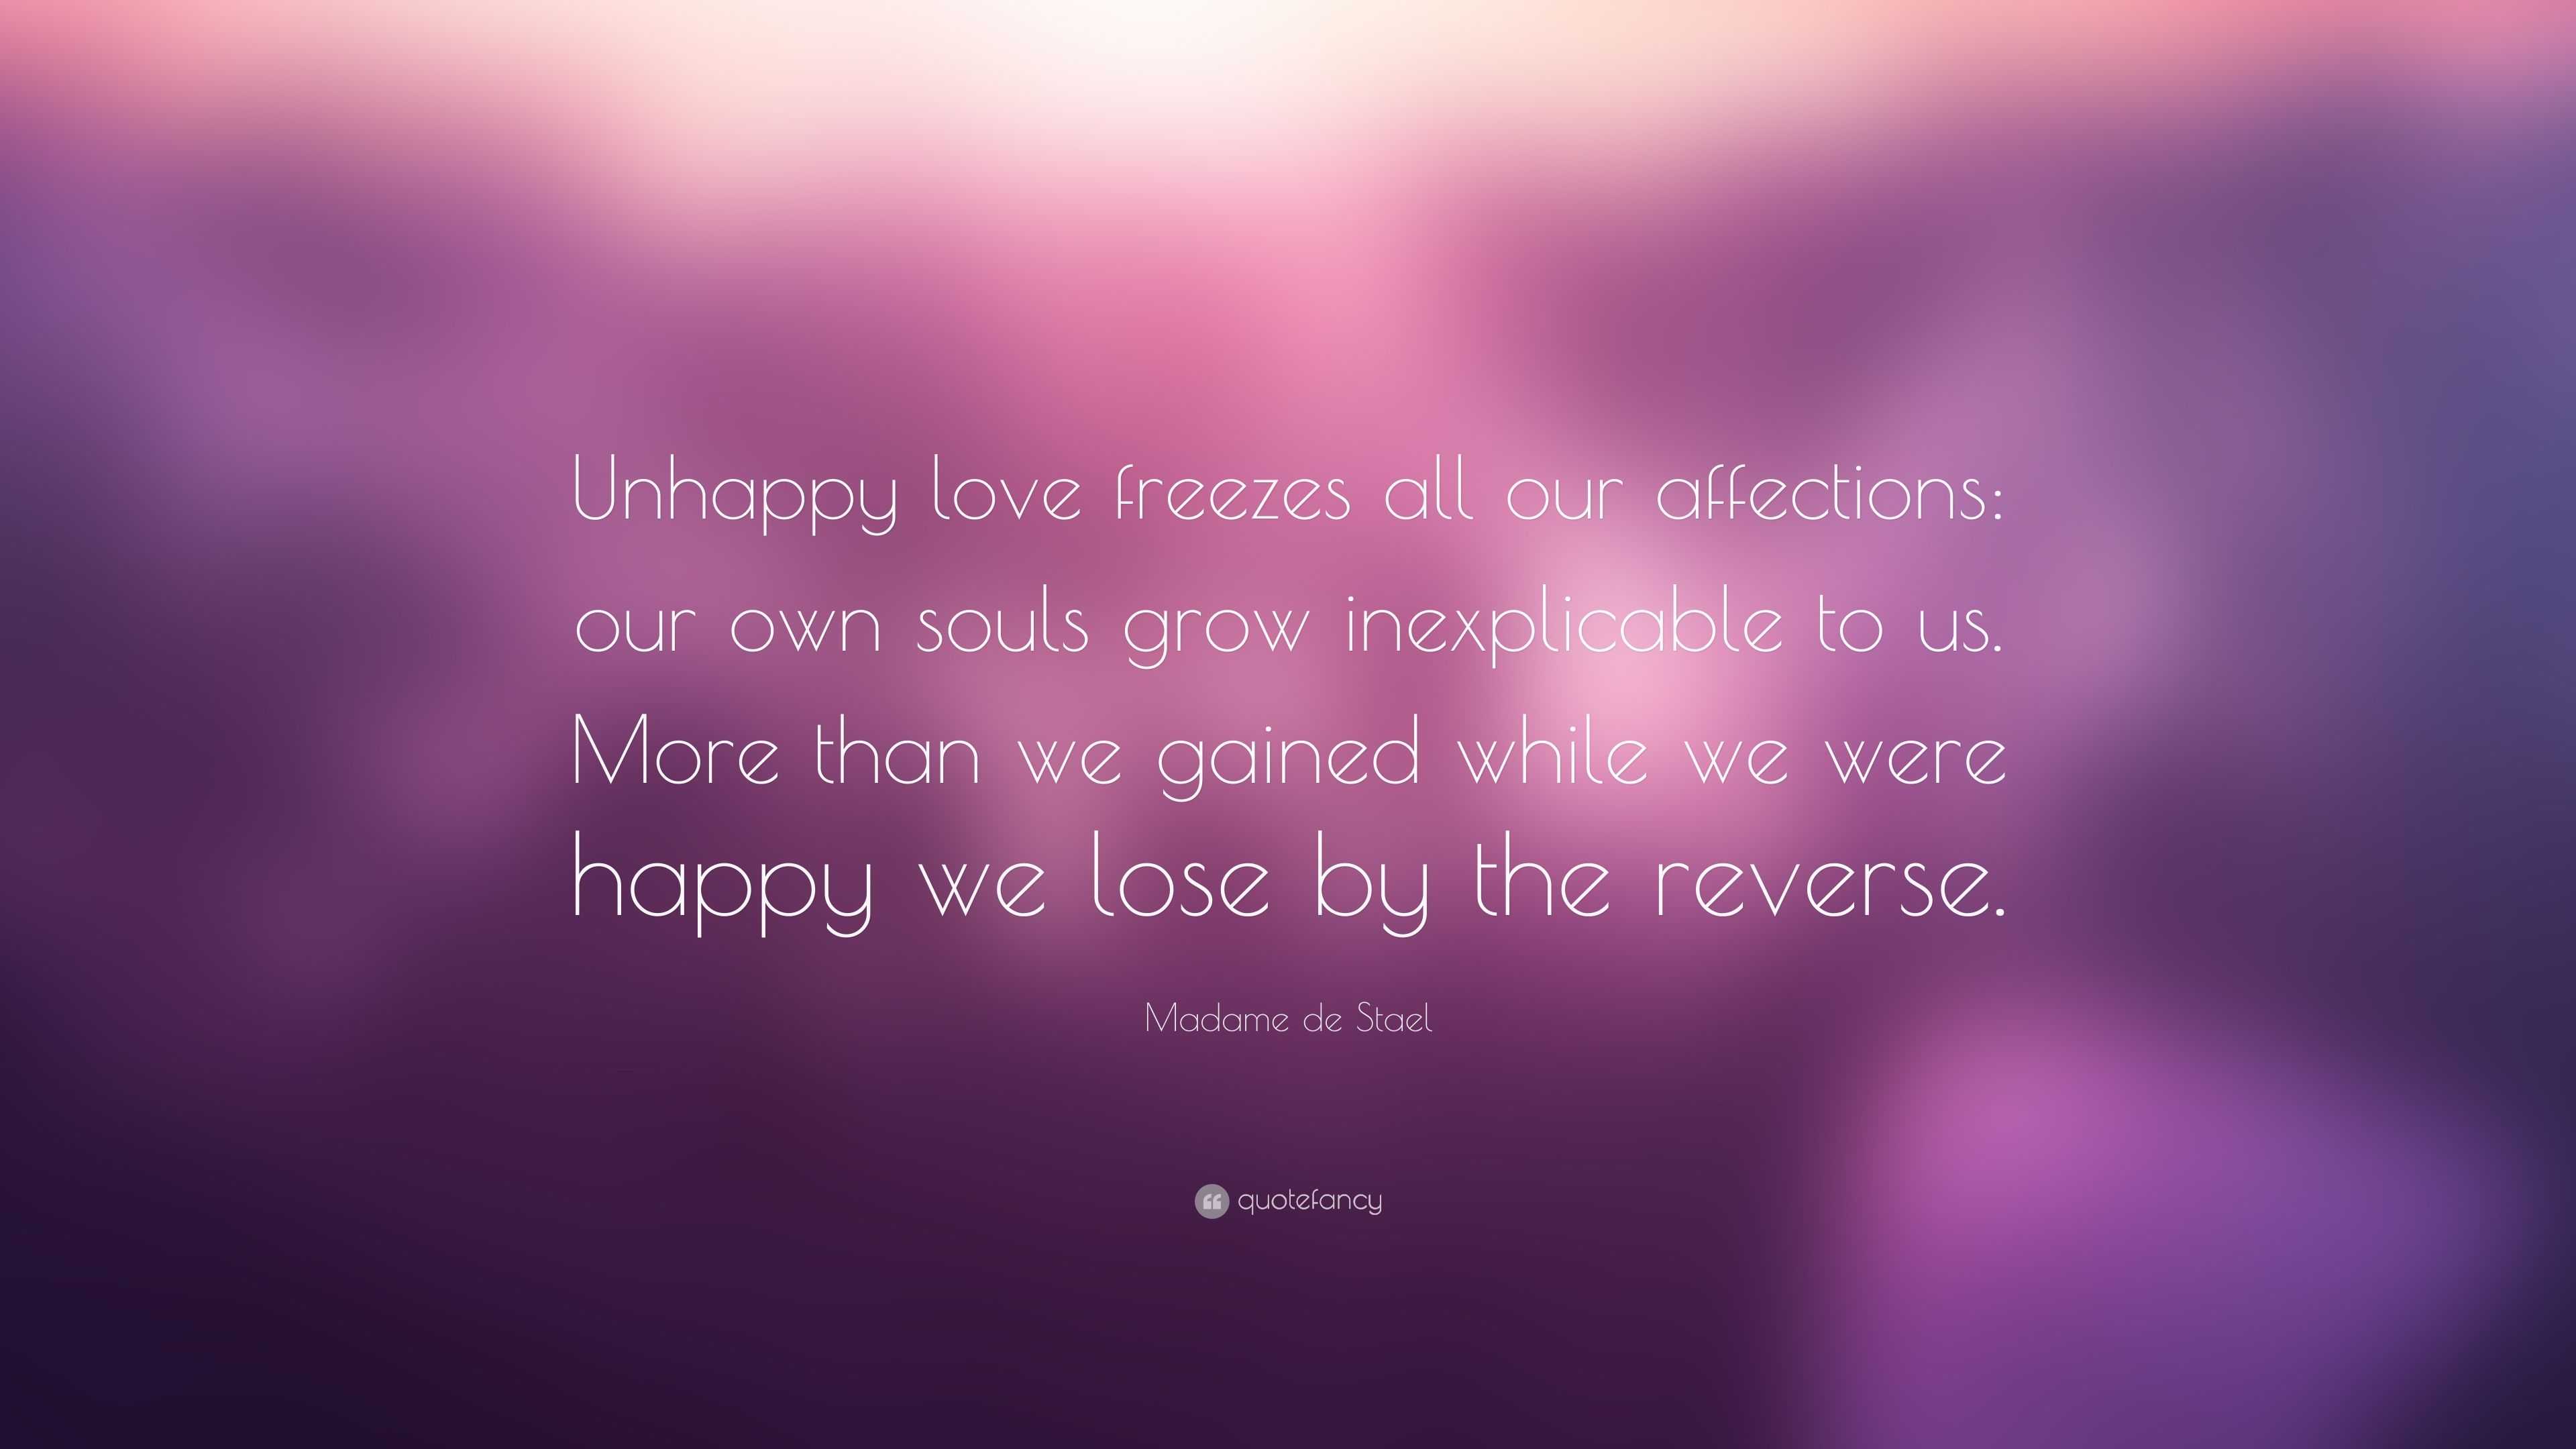 Madame de Stael Quote: “Unhappy love freezes all our affections: our ...